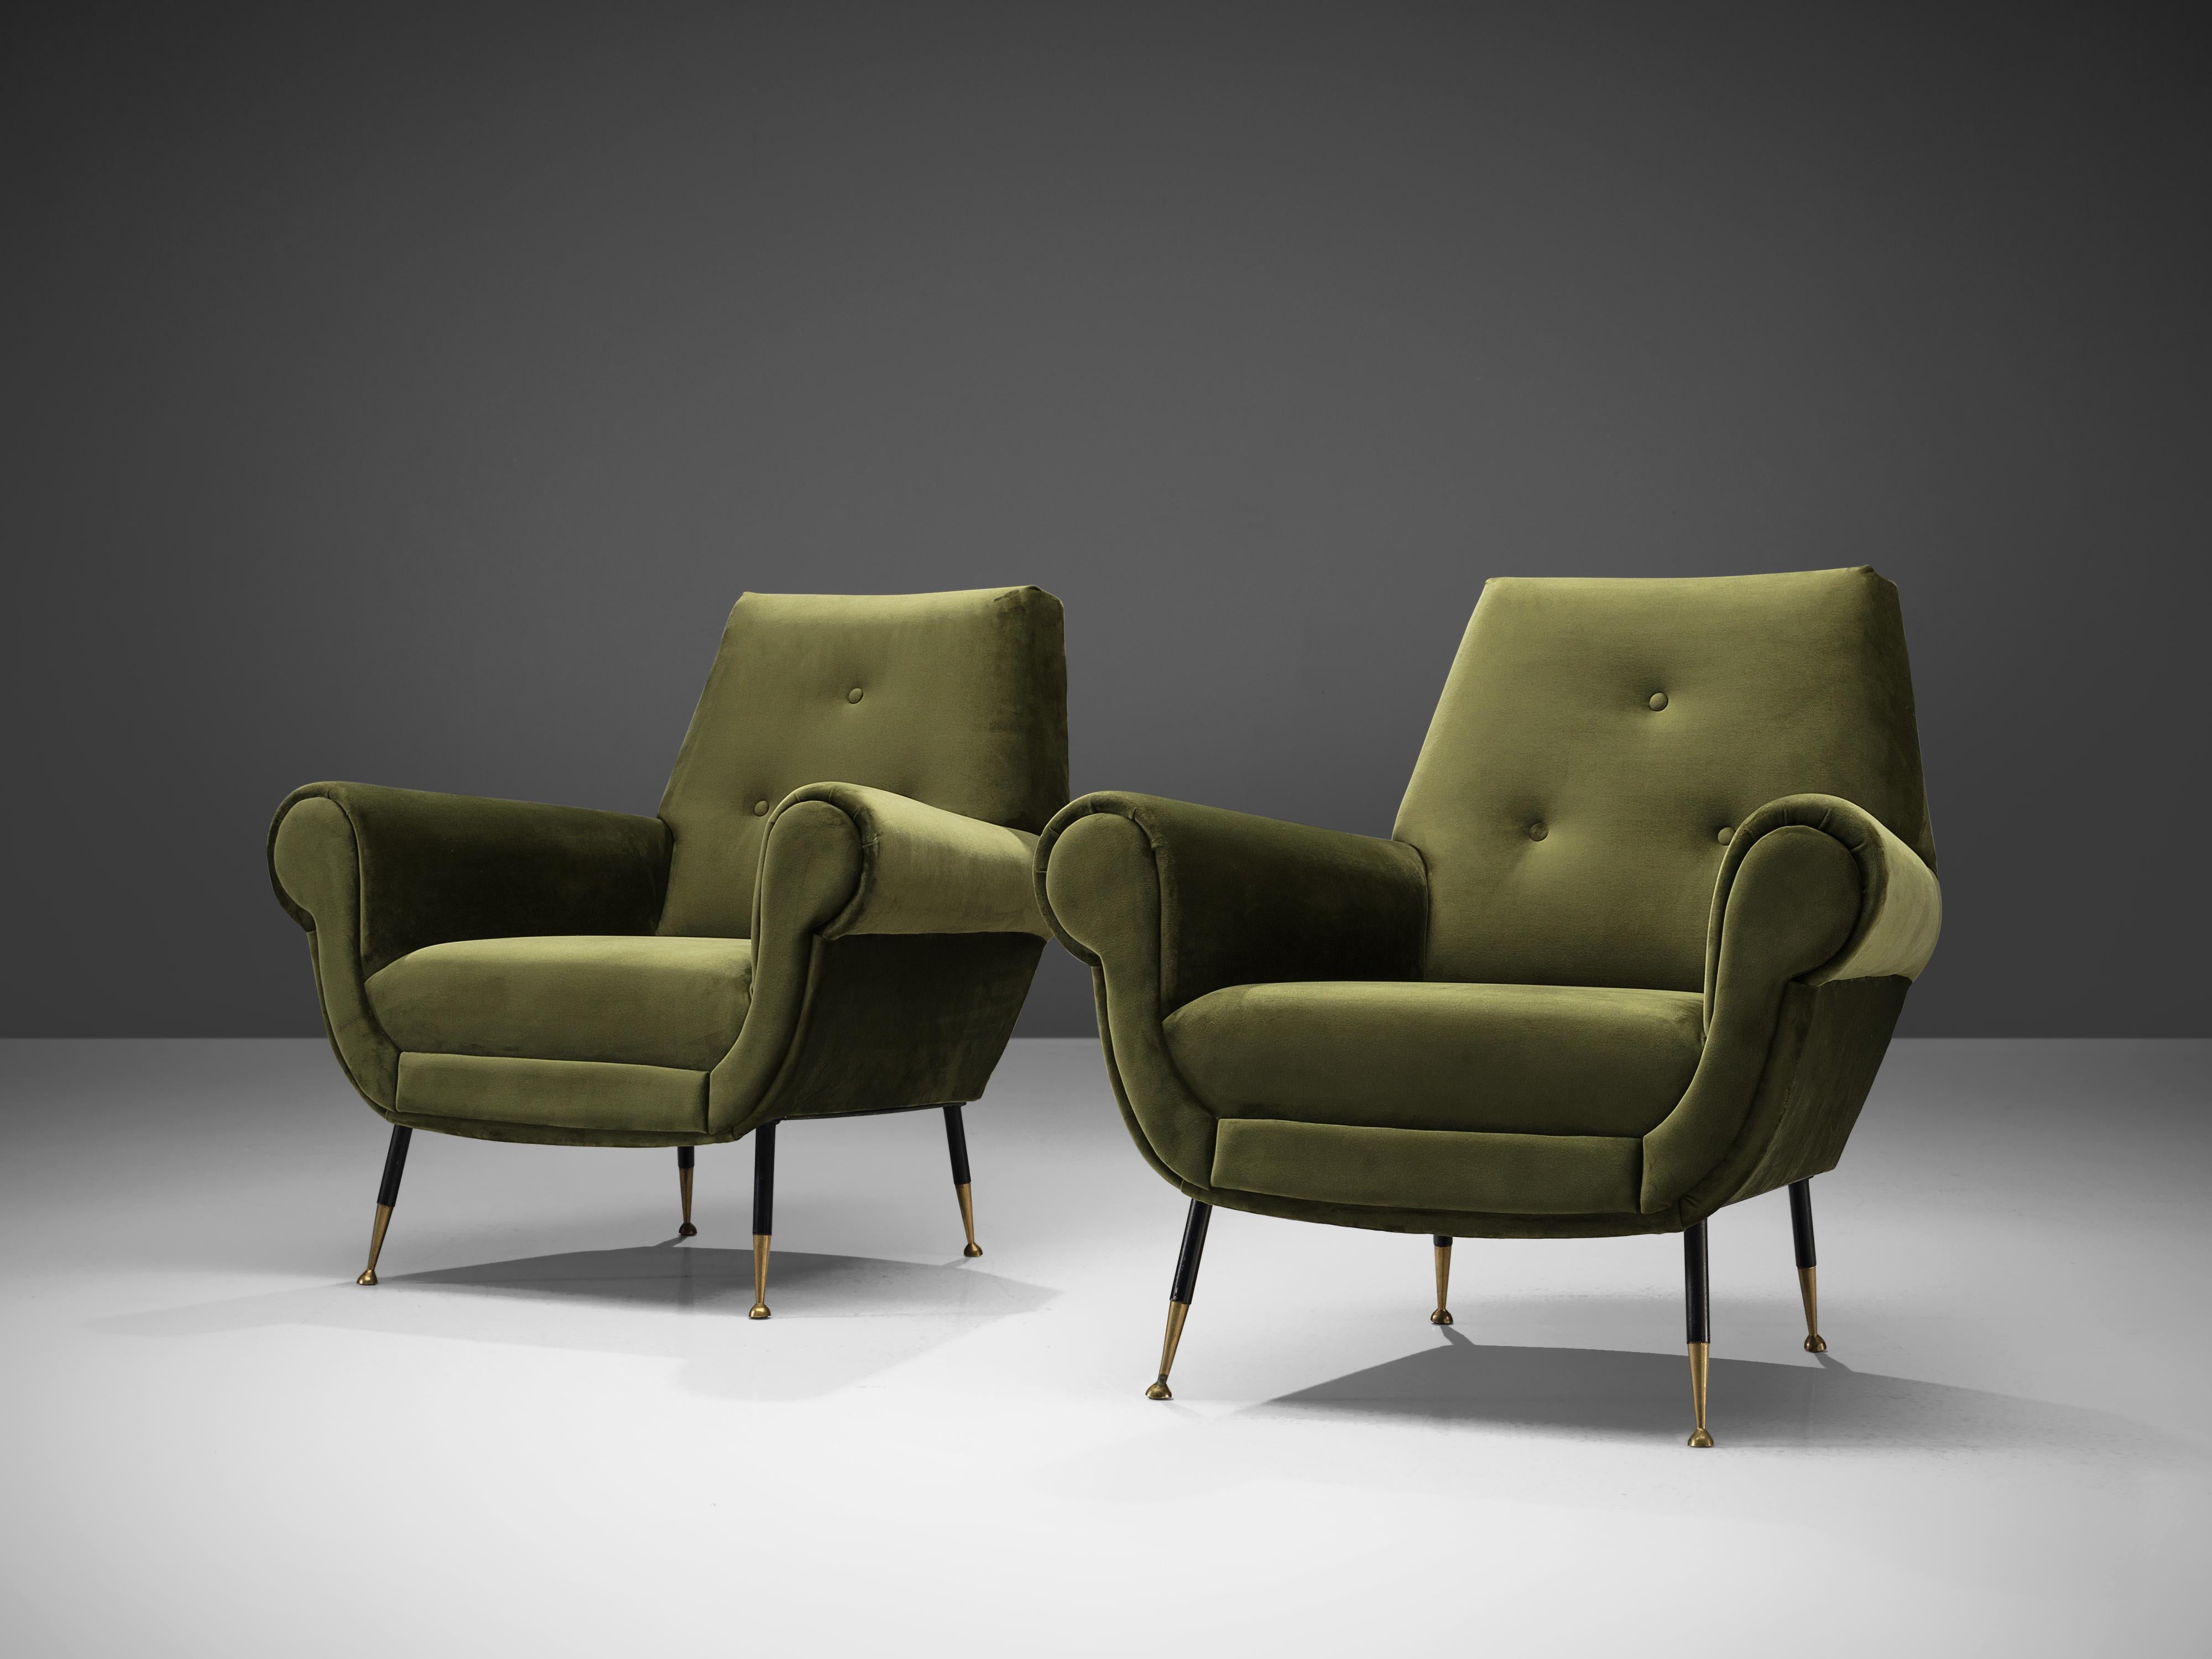 Pair of easy chairs, green velvet, metal, brass, Italy, 1950s

This pair of comfortable easy chairs have thick armrests and are full and rounded. The top is flat and the sides are curved and thick, featuring Classic, traditional details. For